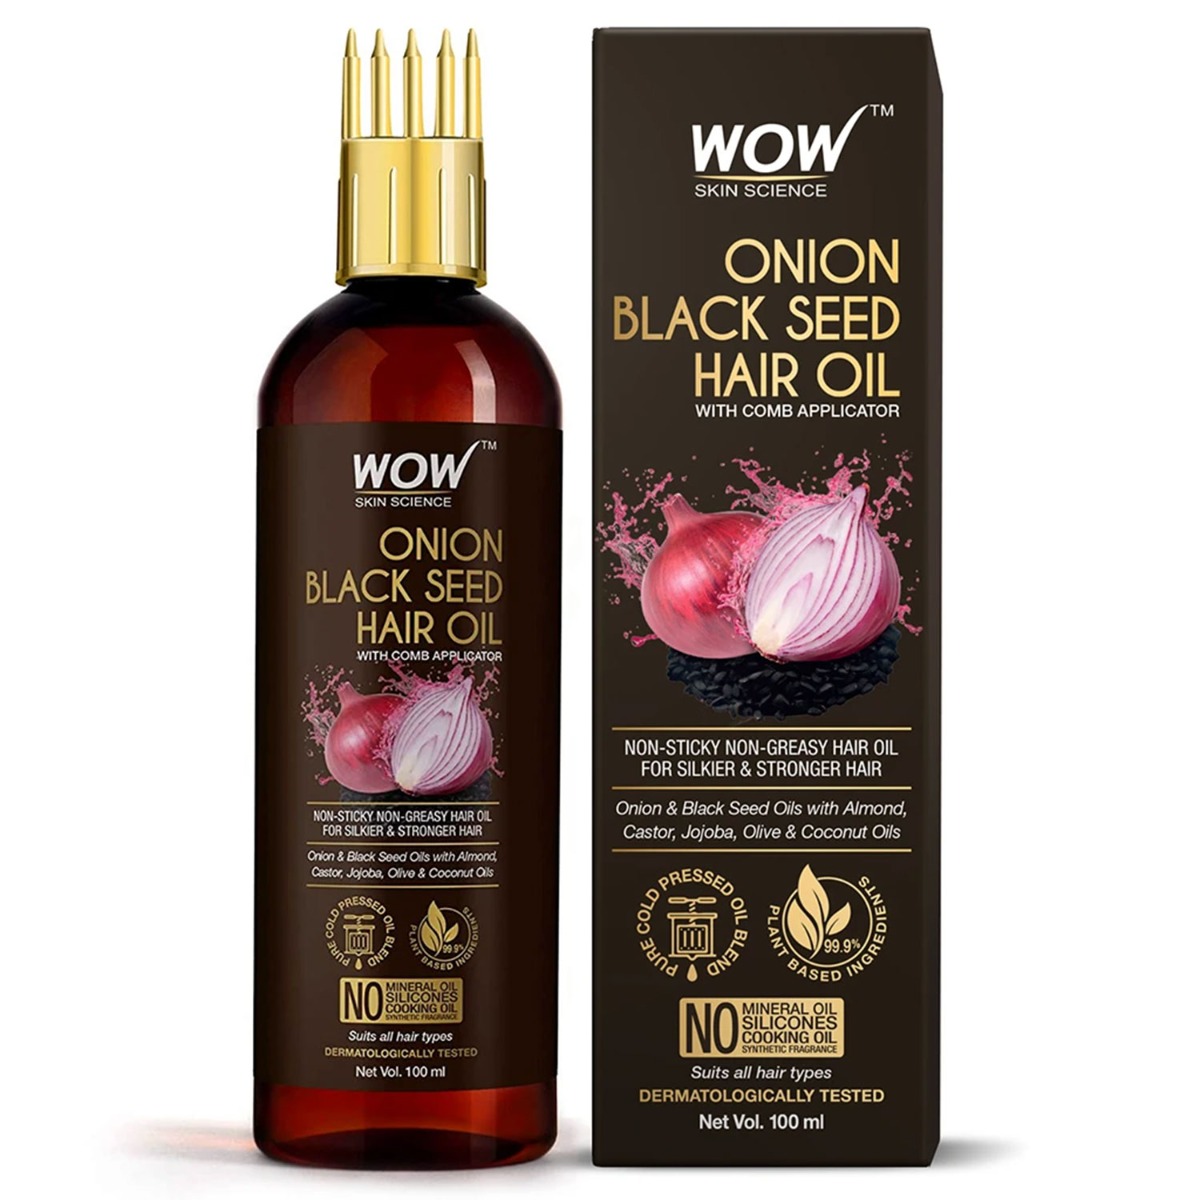 WOW Skin Science Onion Black Seed Hair Oil With Comb Applicator, 100ml